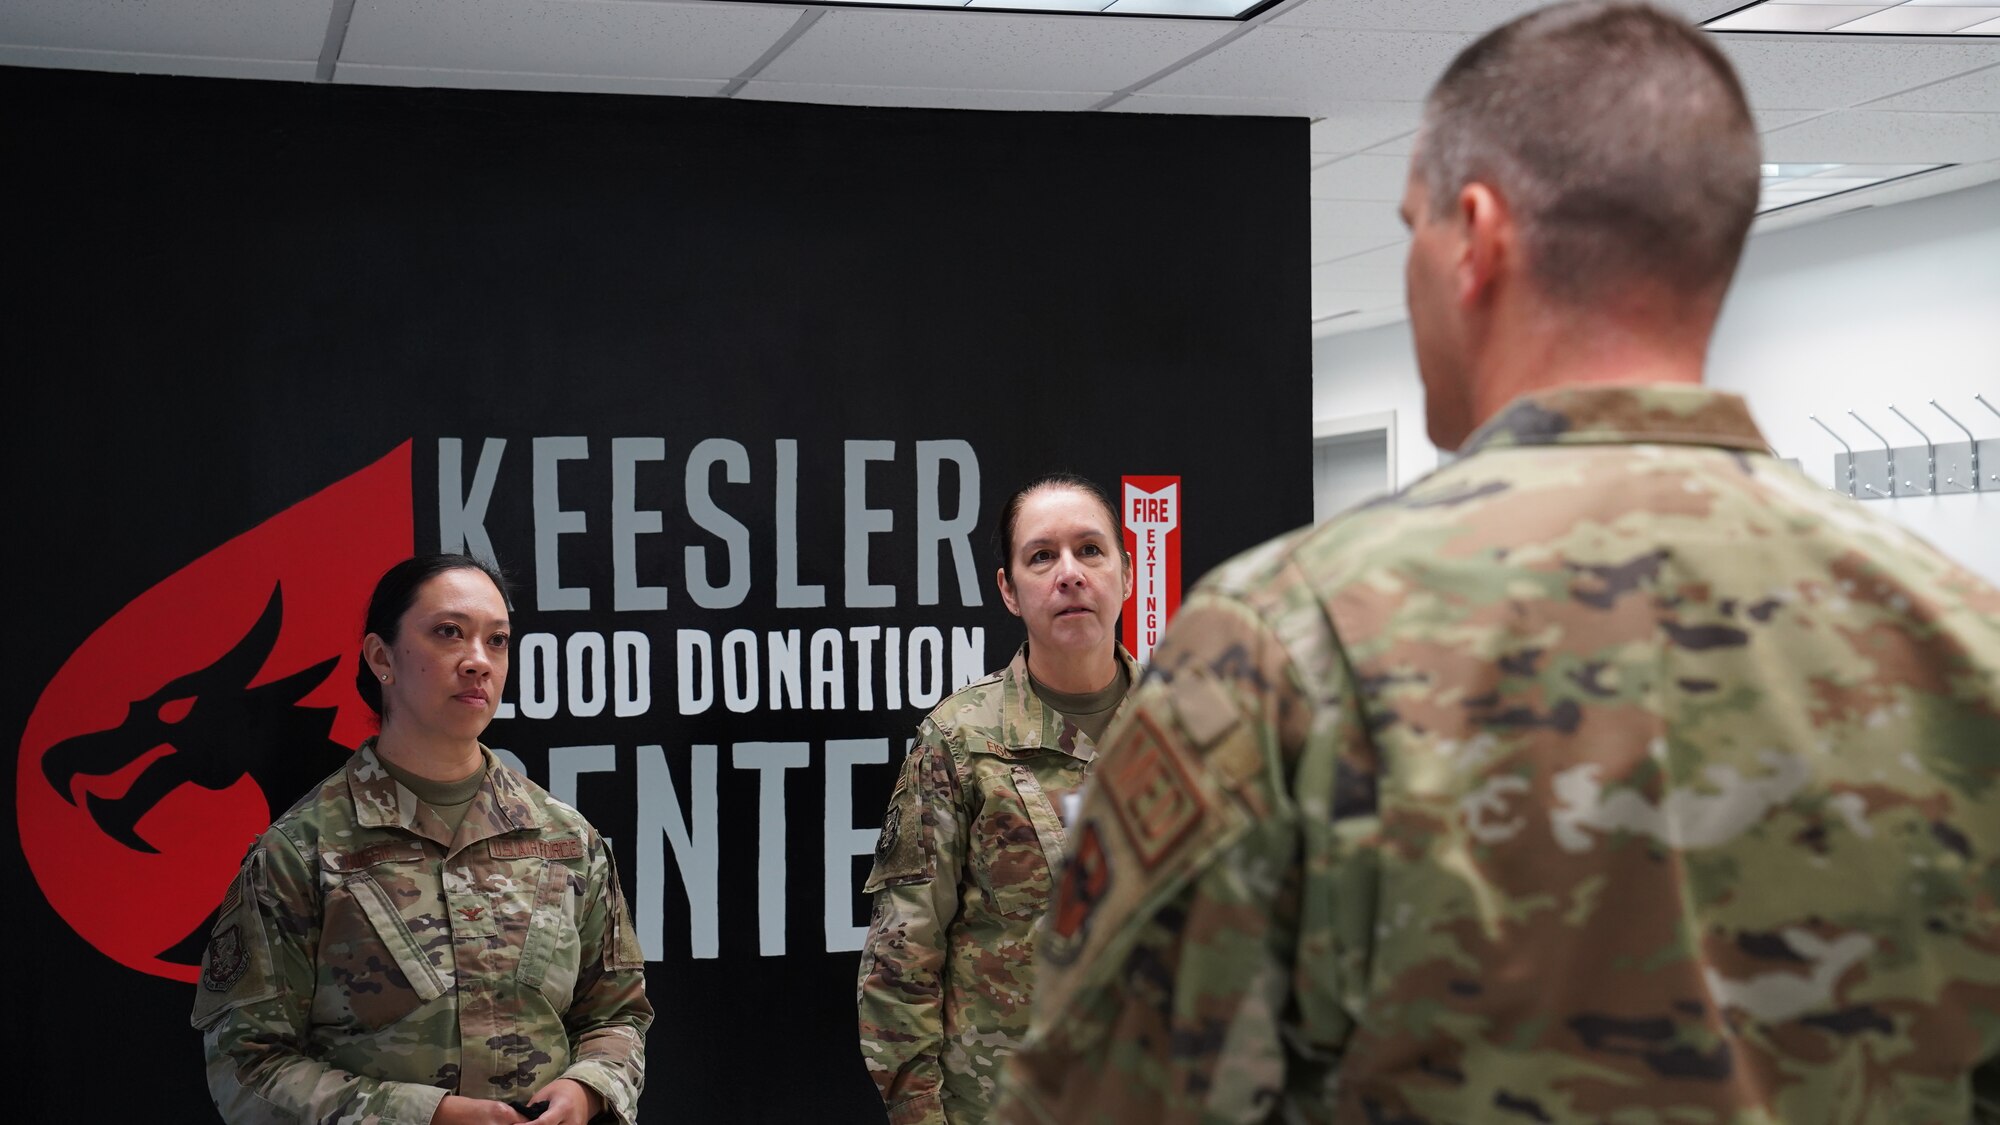 U.S. Air Force Col. Lynne Bussie, 81st Medical Group deputy commander, and Chief Master Sgt. Paula Eischen, 81st MDG senior enlisted leader, tour the Blood Donation Center during their open house at Keesler Air Force Base, Mississippi, Sept. 9, 2022. The BDC’s mission is to support the Armed Services Blood Program by collecting, processing, storing, distributing and transfusing blood worldwide in times of peace and war.